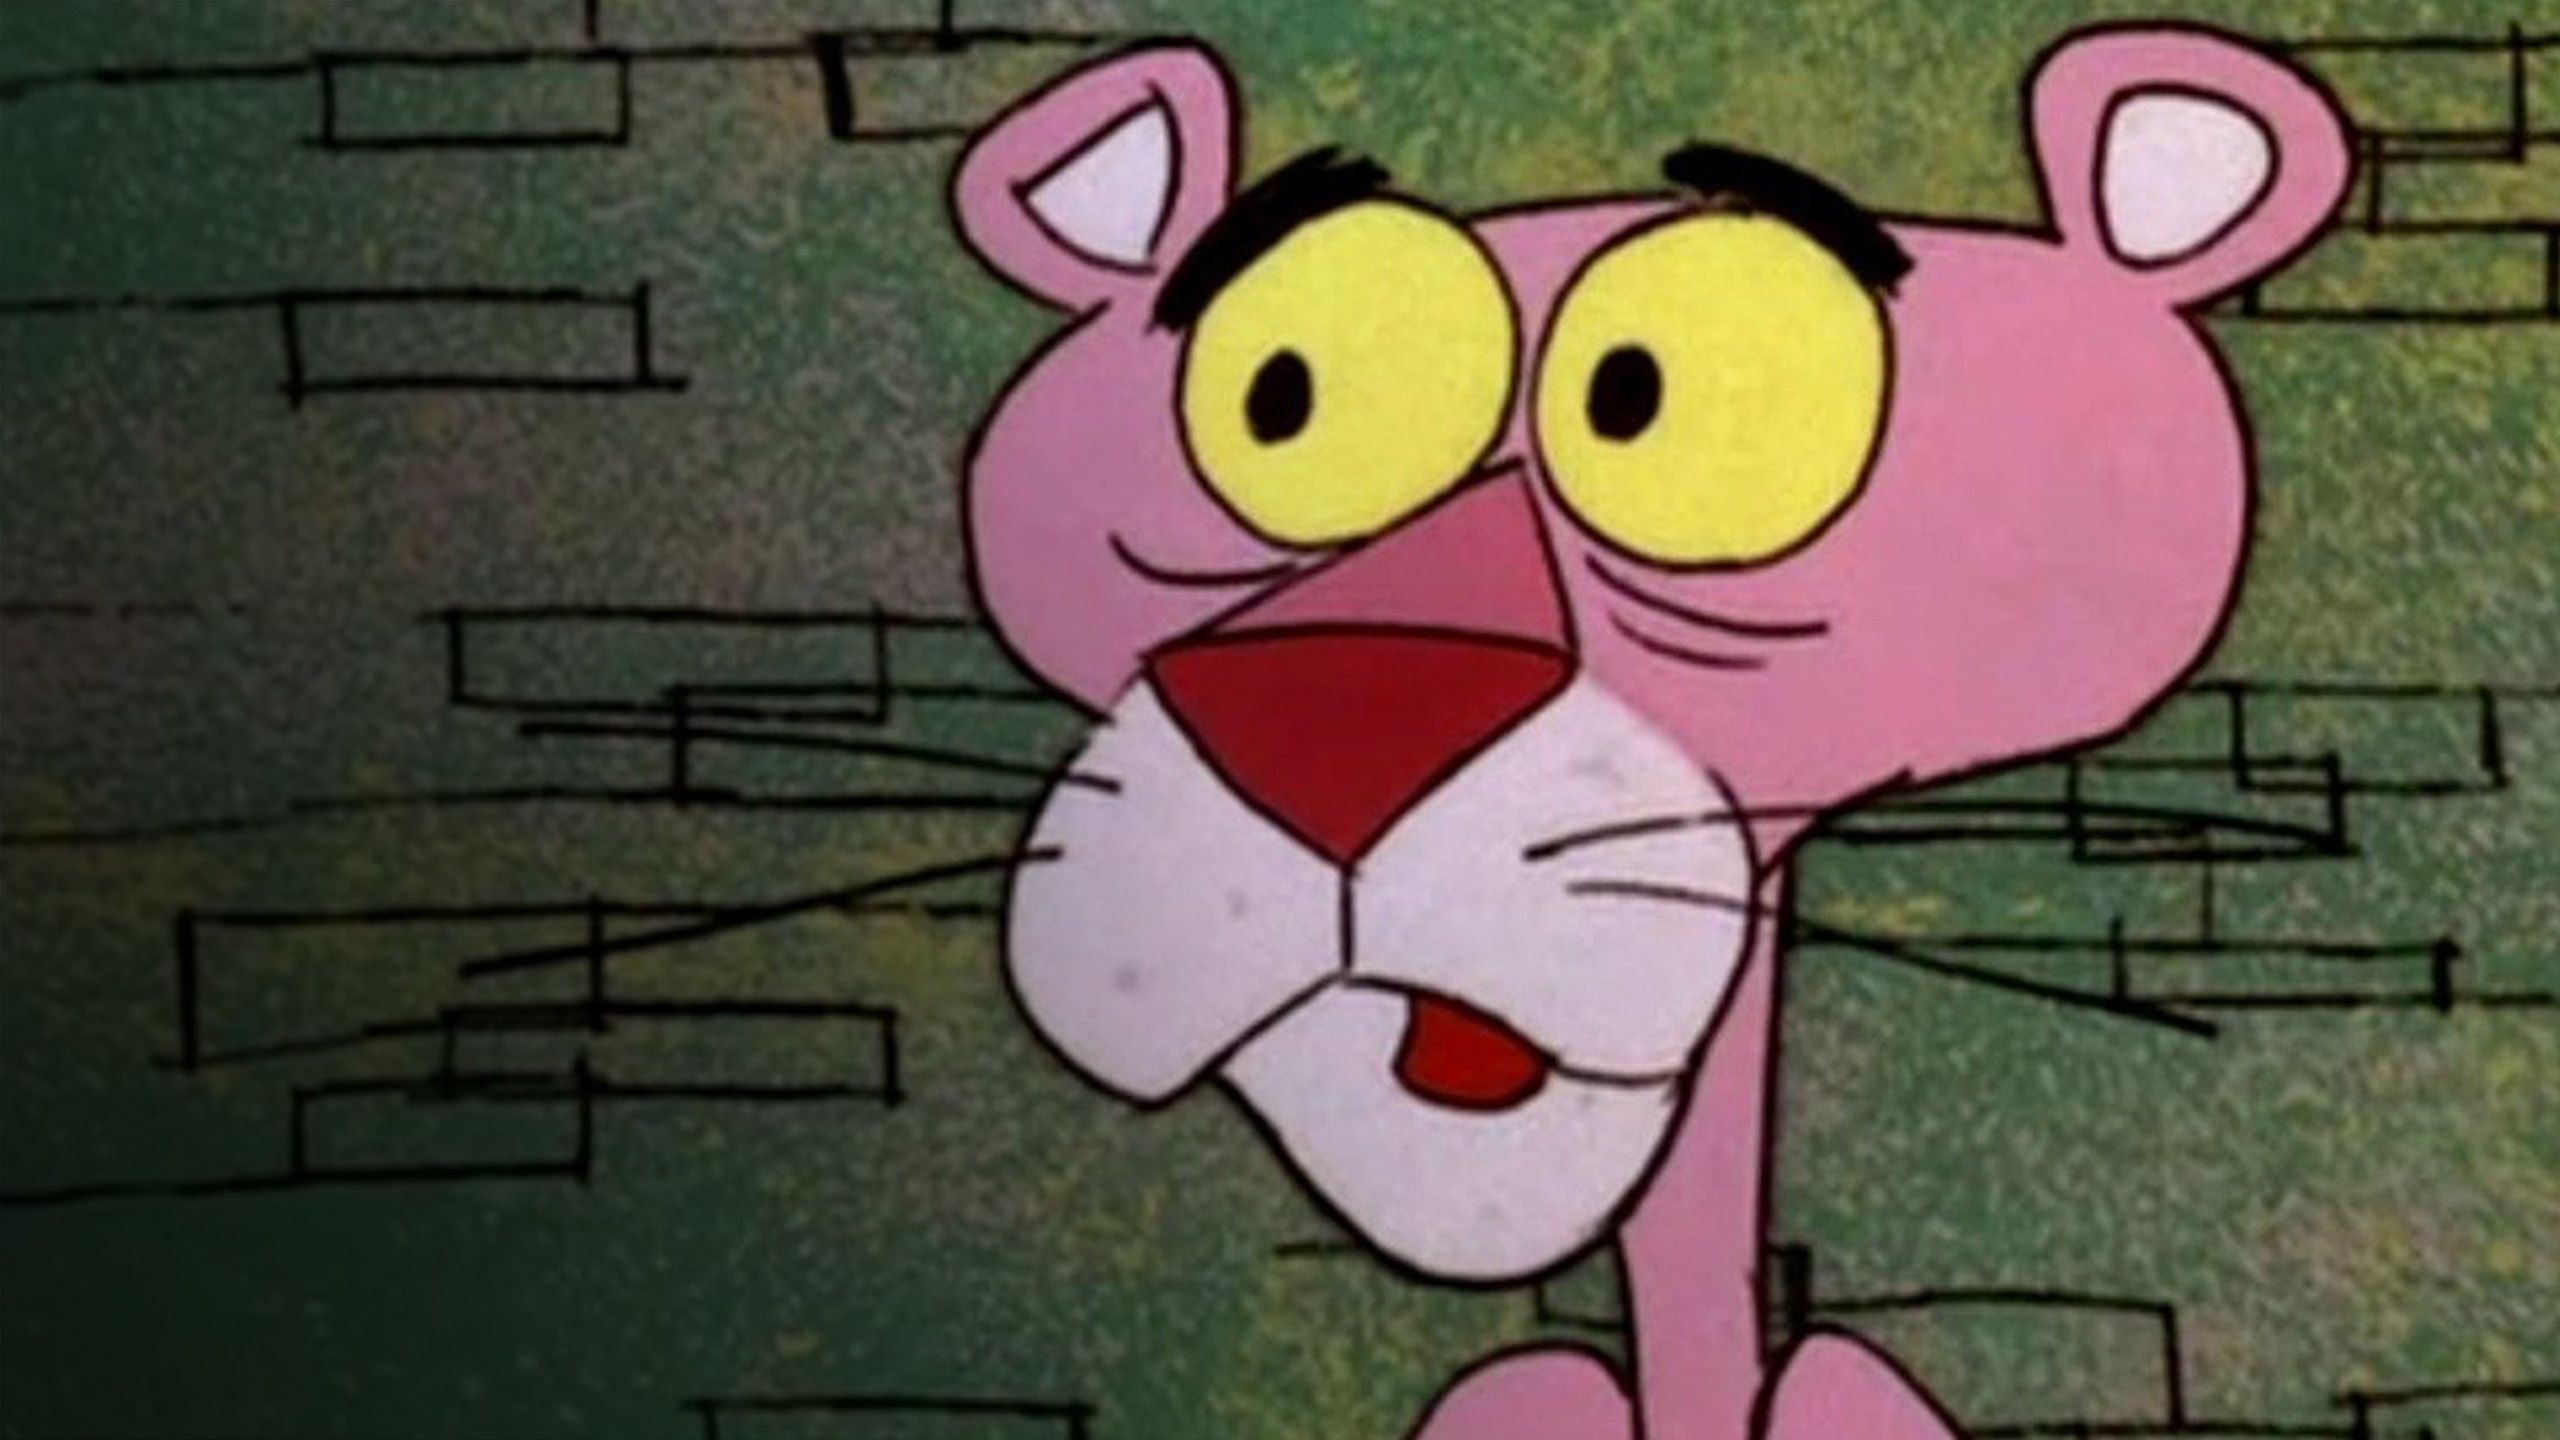 The Pink Panther Show is a classic cartoon series that was produced by Halas and Batchelor and aired in the 1960s. - Pink Panther